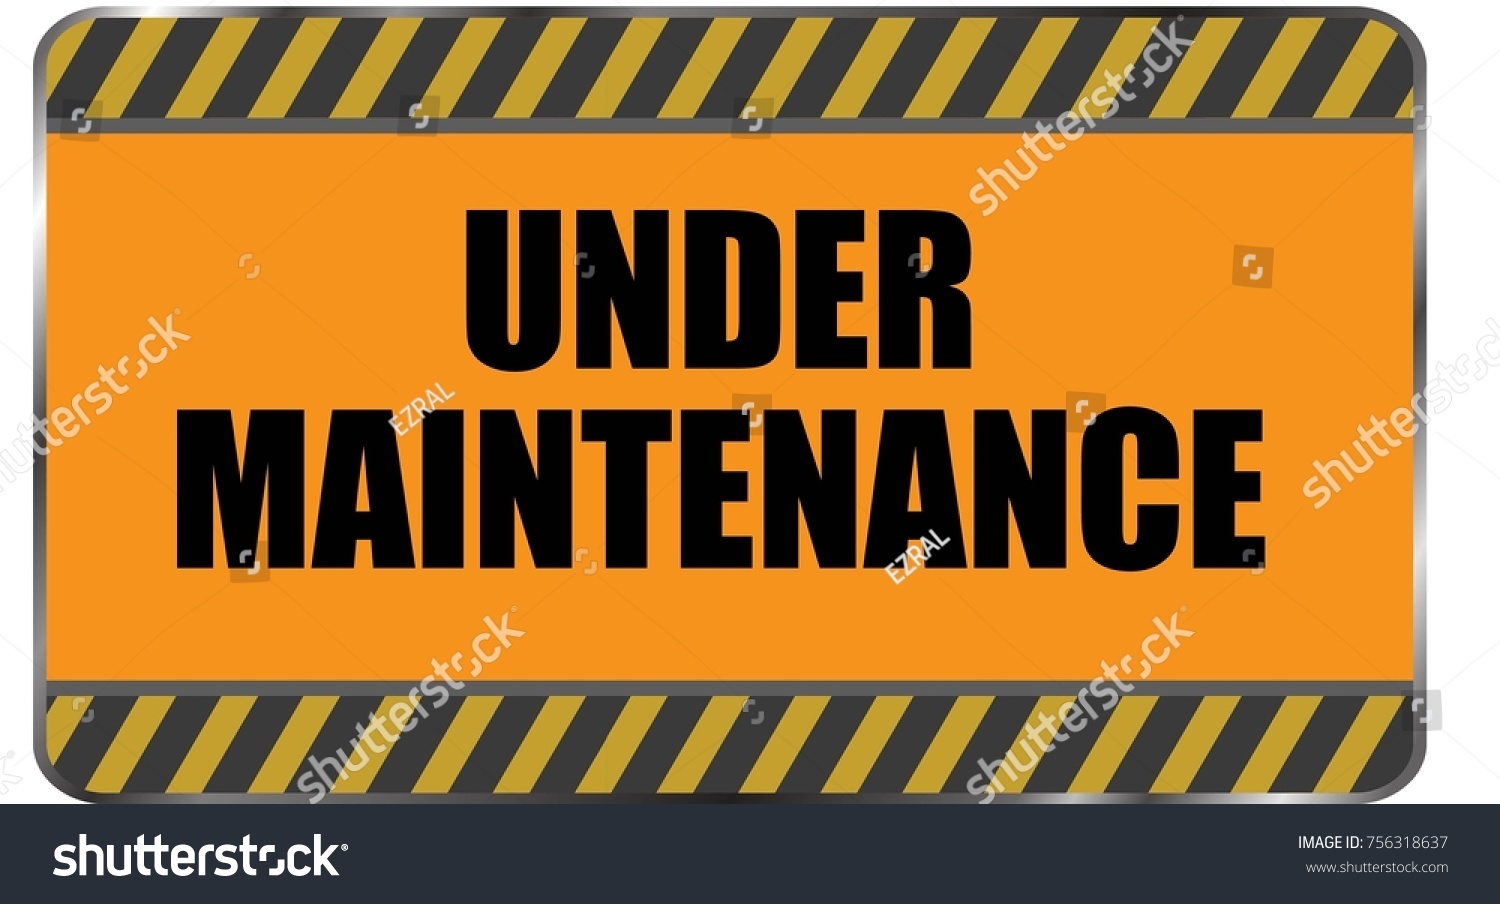 Under maintenance could be gofile Valorant Servers